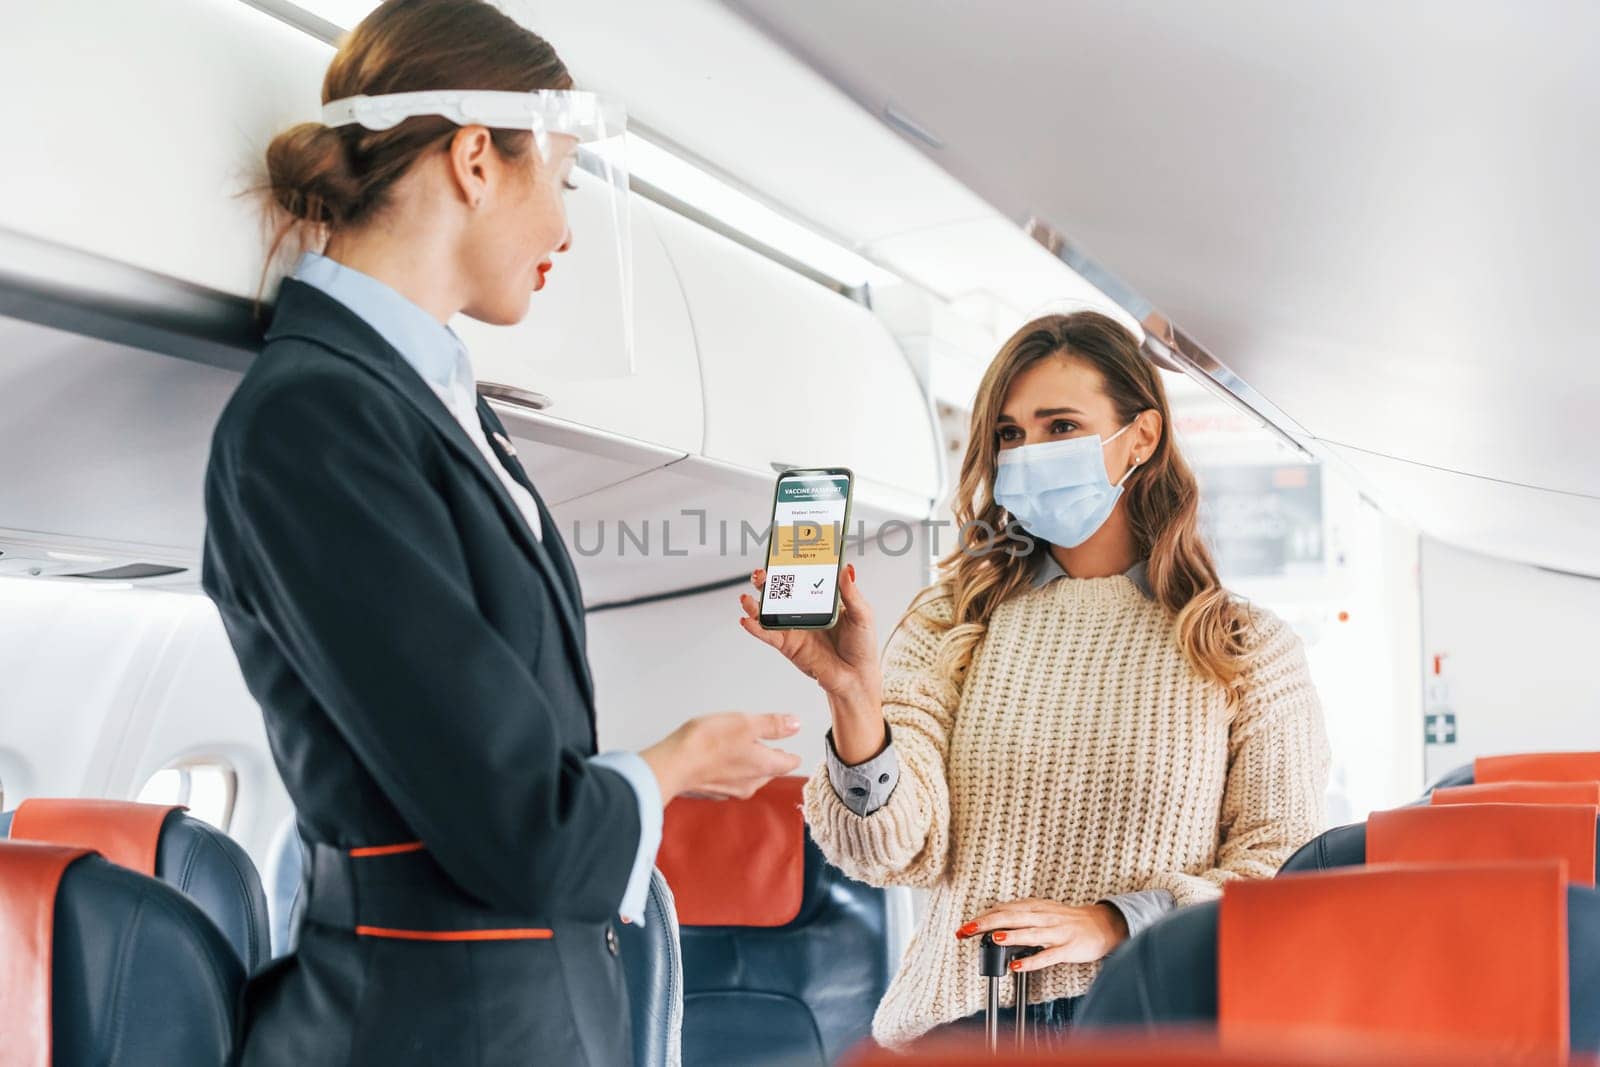 Showing COVID-19 vaccine sertificate to stewardess. Young female passanger in casual clothes is in the plane.